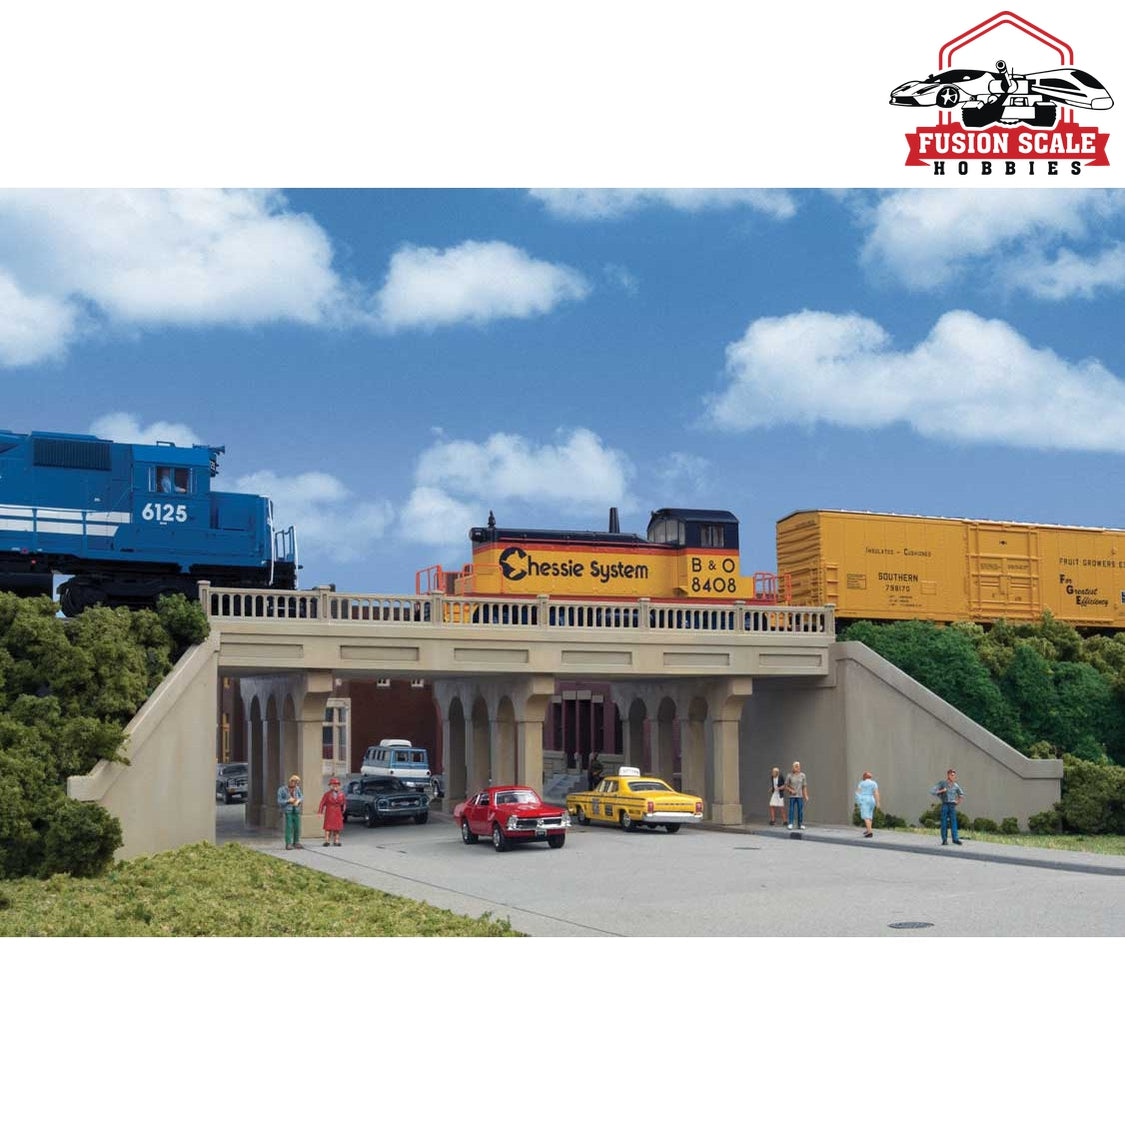 Walthers Cornerstone HO Scale Urban Concrete Overpass Kit